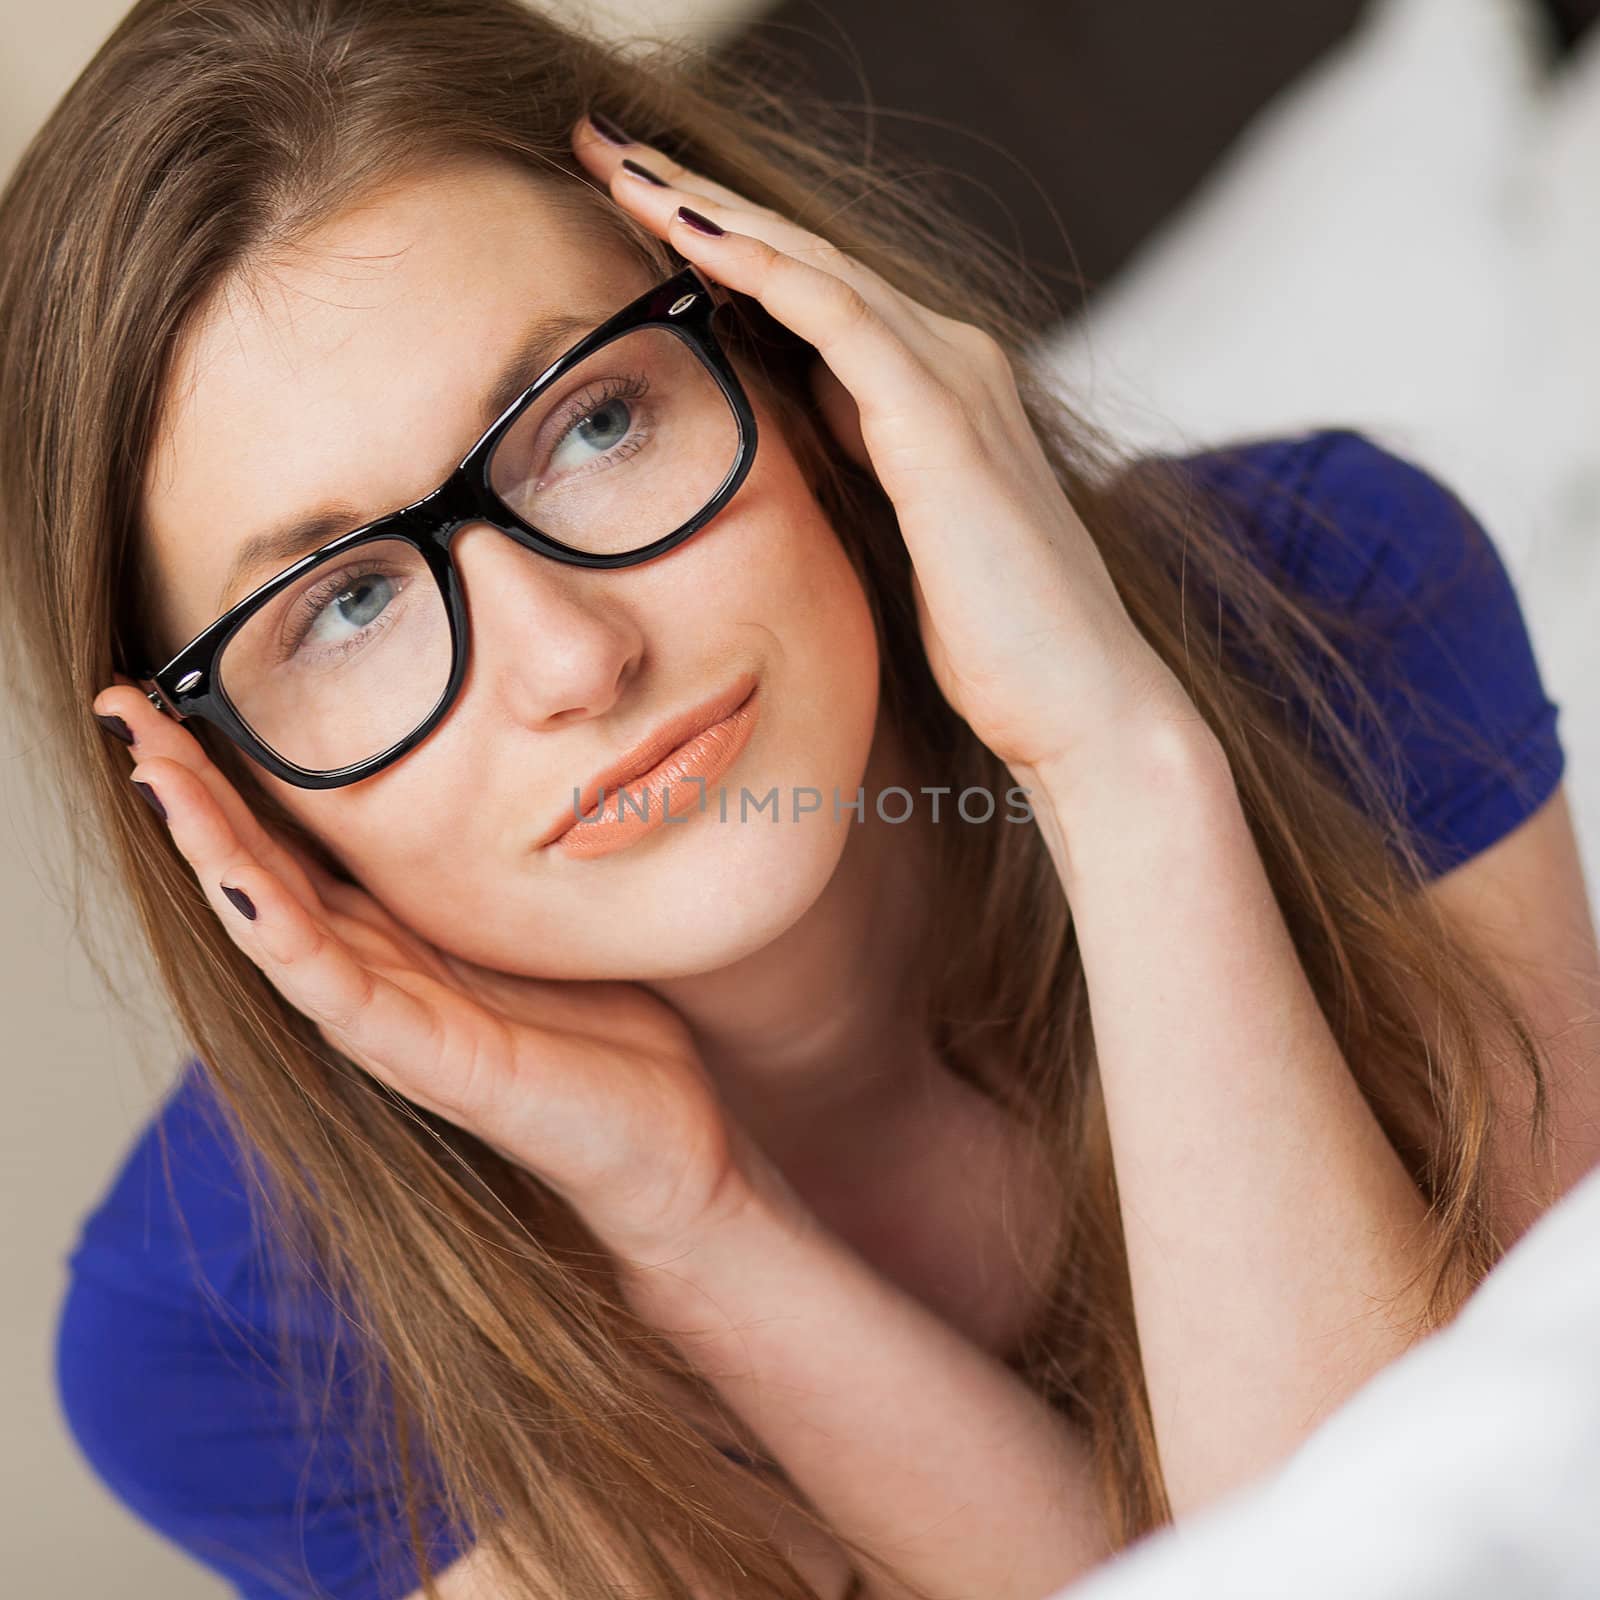 Cute young girl in glasses posing on the bed